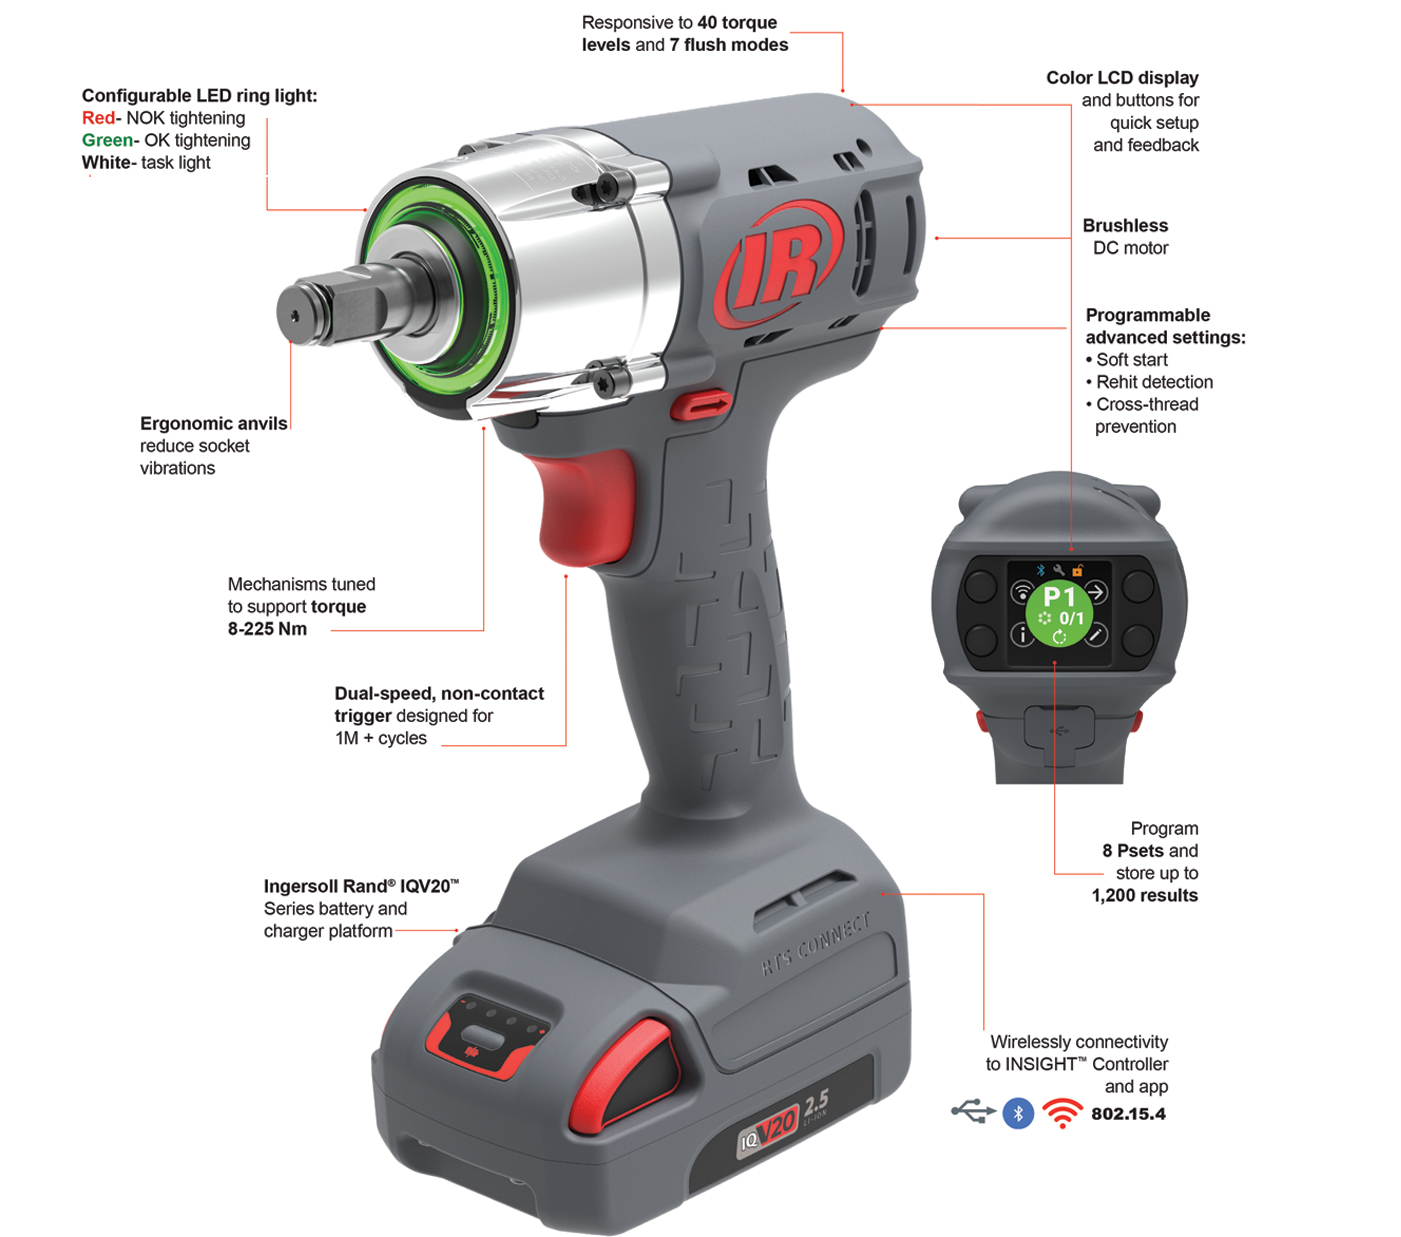 RTS Tool Walkaround - Dual-speed, non-contact trigger for 1M + cycles. Support torque 8-225 Nm. Program 8 Psets and store up to 1,200 results.  Ergonomic anvils reduce socket vibrations. Responsive to 40 torque levels and 7 flush modes. Color LCD Display and buttons for quick setup and feedback. Brushless DC motor.